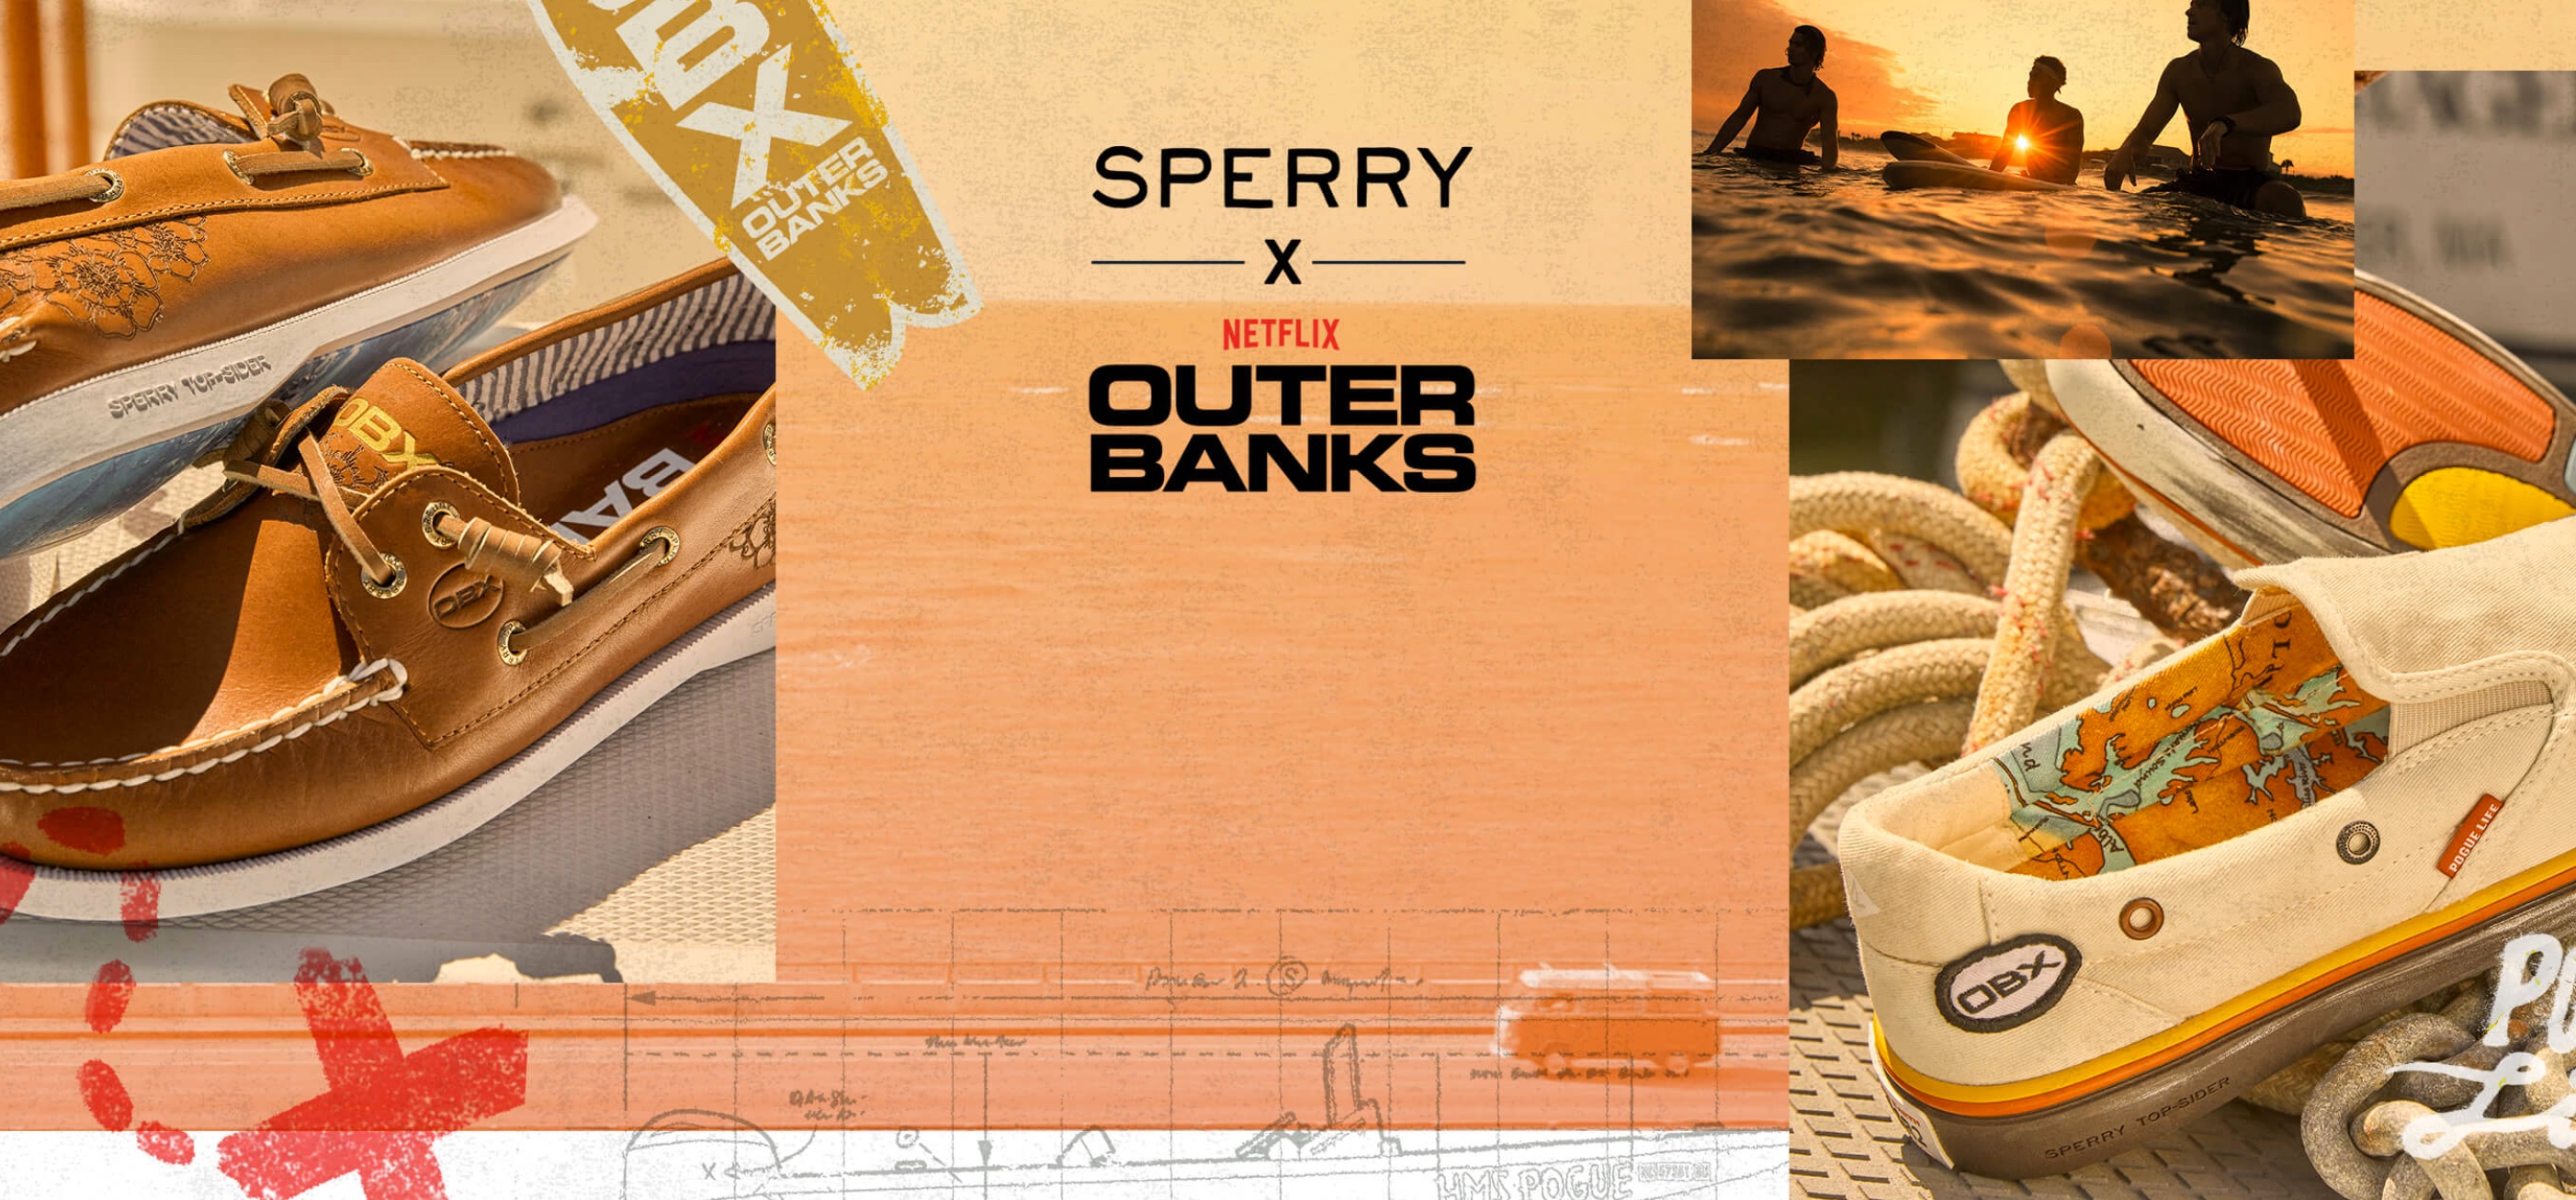 Sperry Topsider OBX Netflix Outer Banks 8.5 new in box